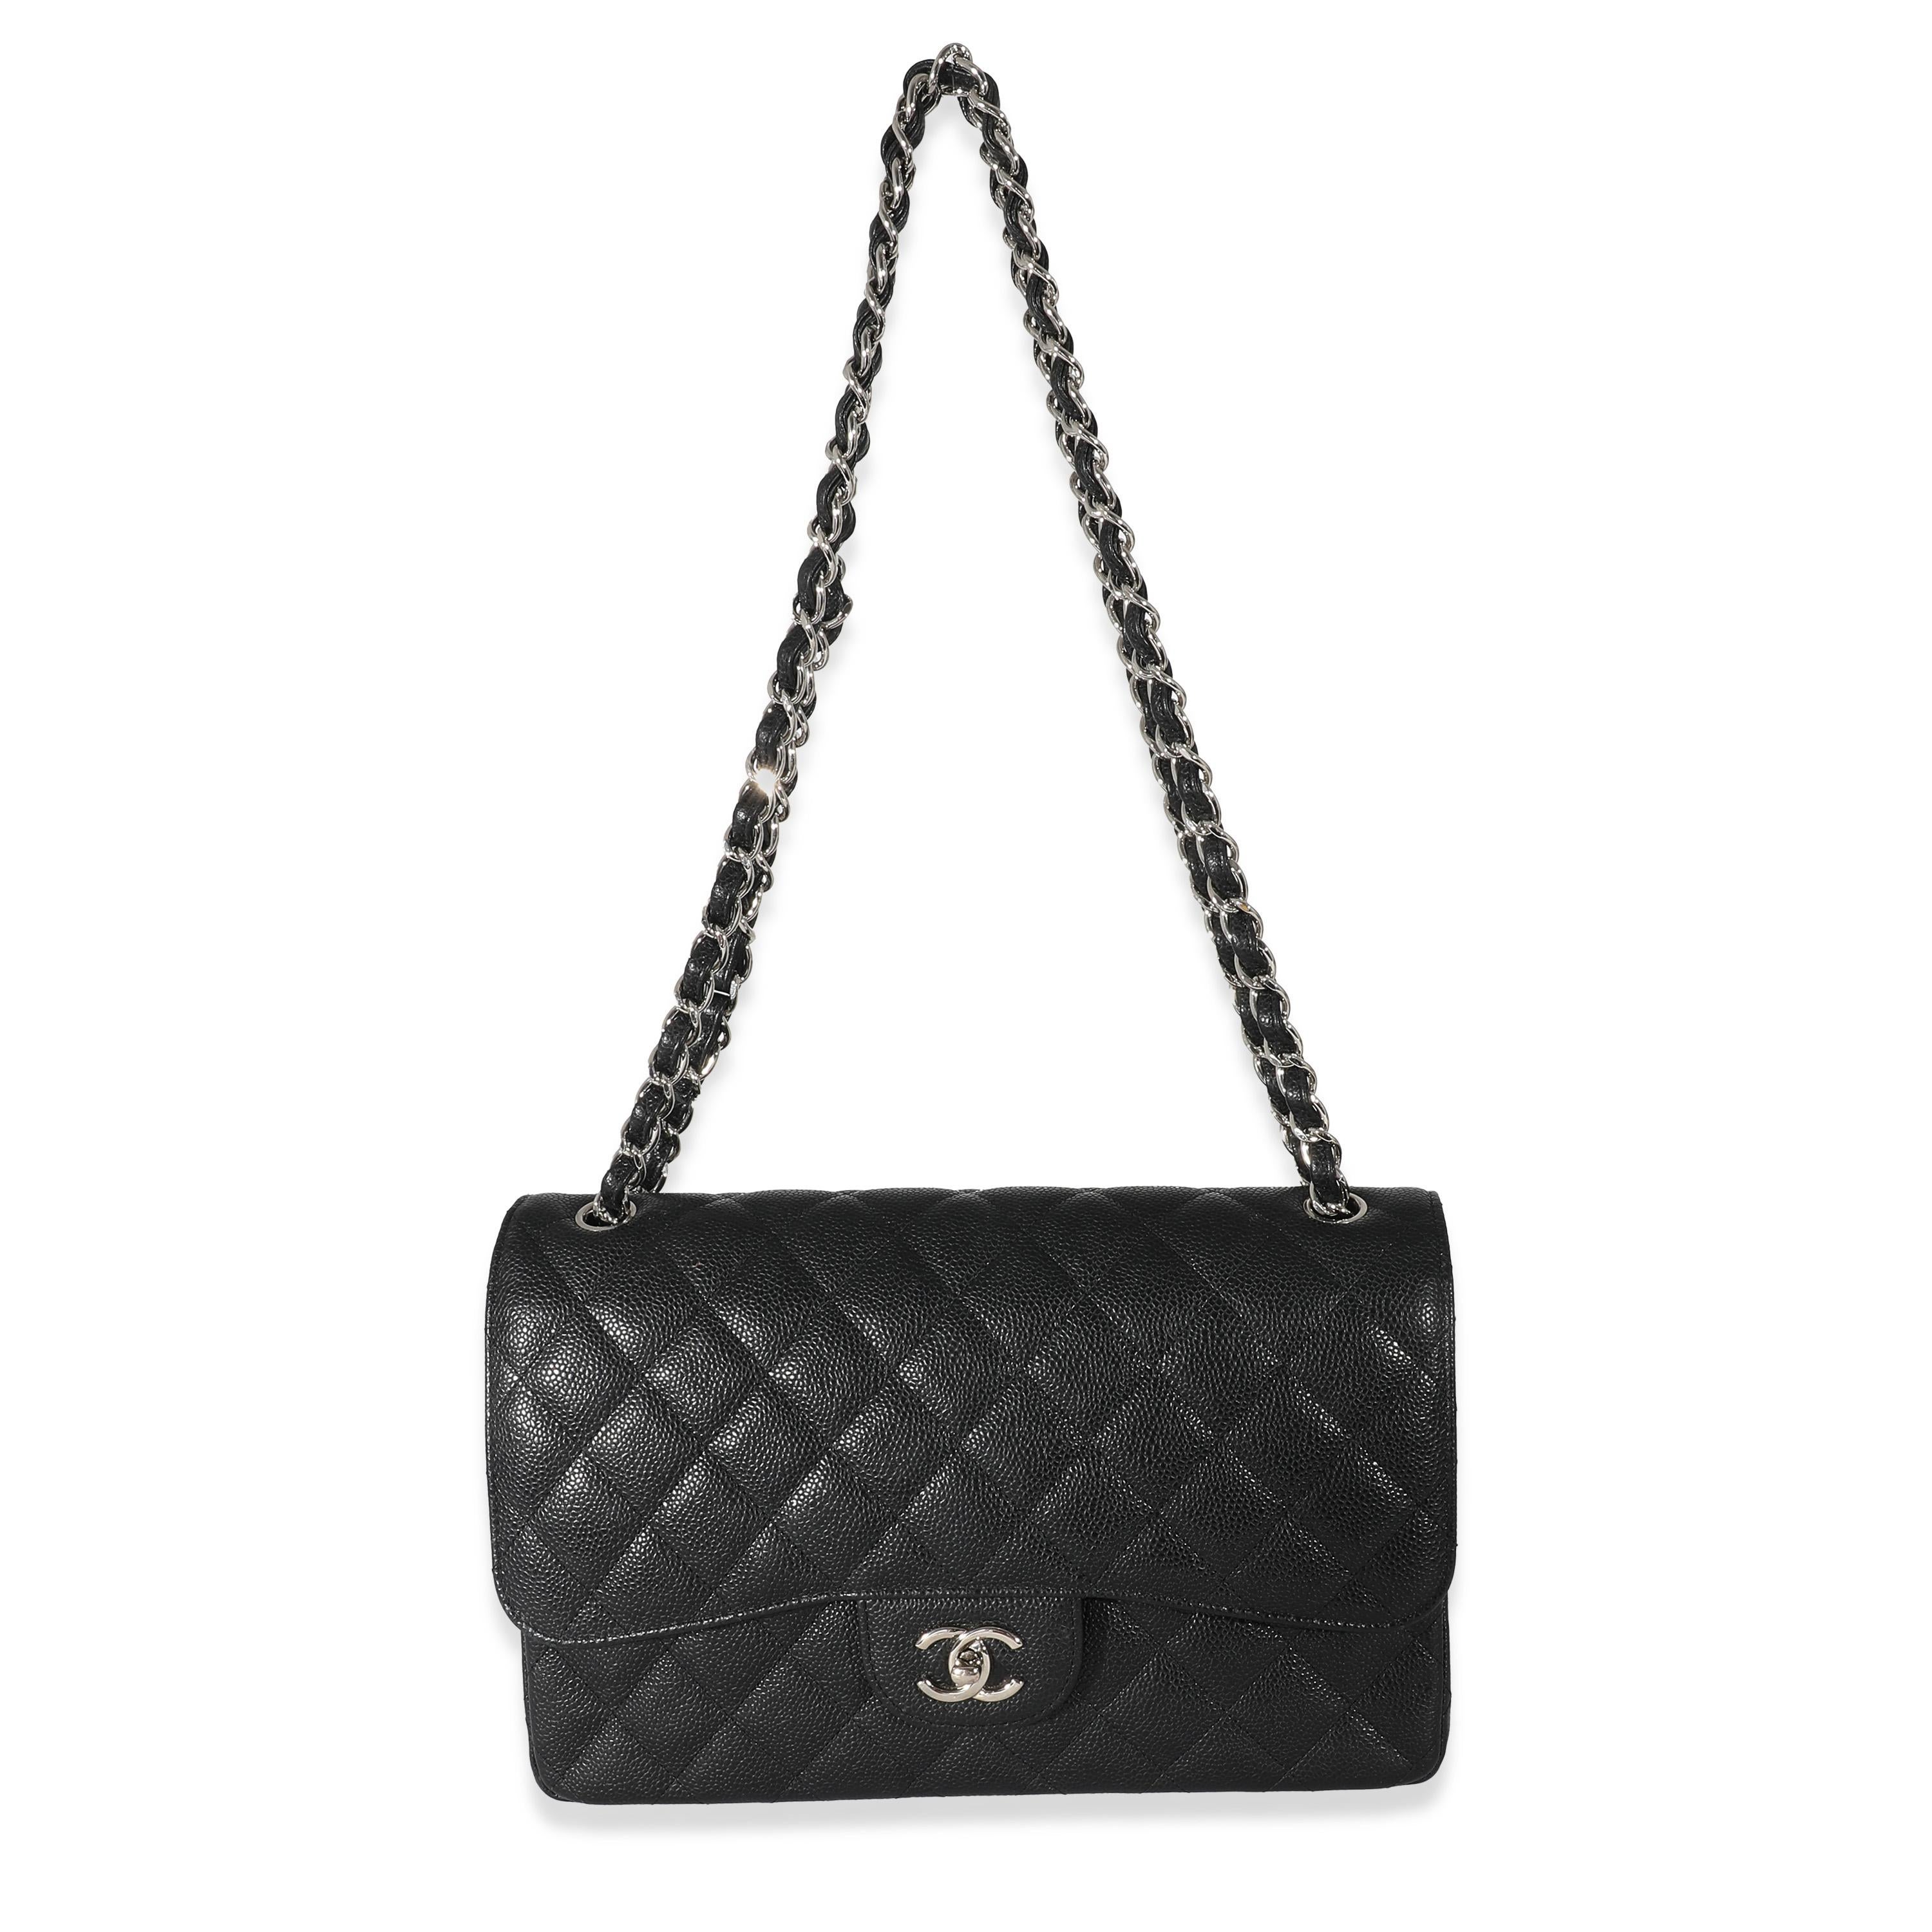 Listing Title: Chanel Black Quilted Caviar Jumbo Double Flap Bag
SKU: 133219
Condition: Pre-owned 
Handbag Condition: Very Good
Condition Comments: Item is in very good condition with minor signs of wear. Exterior scuffing and marks throughout.